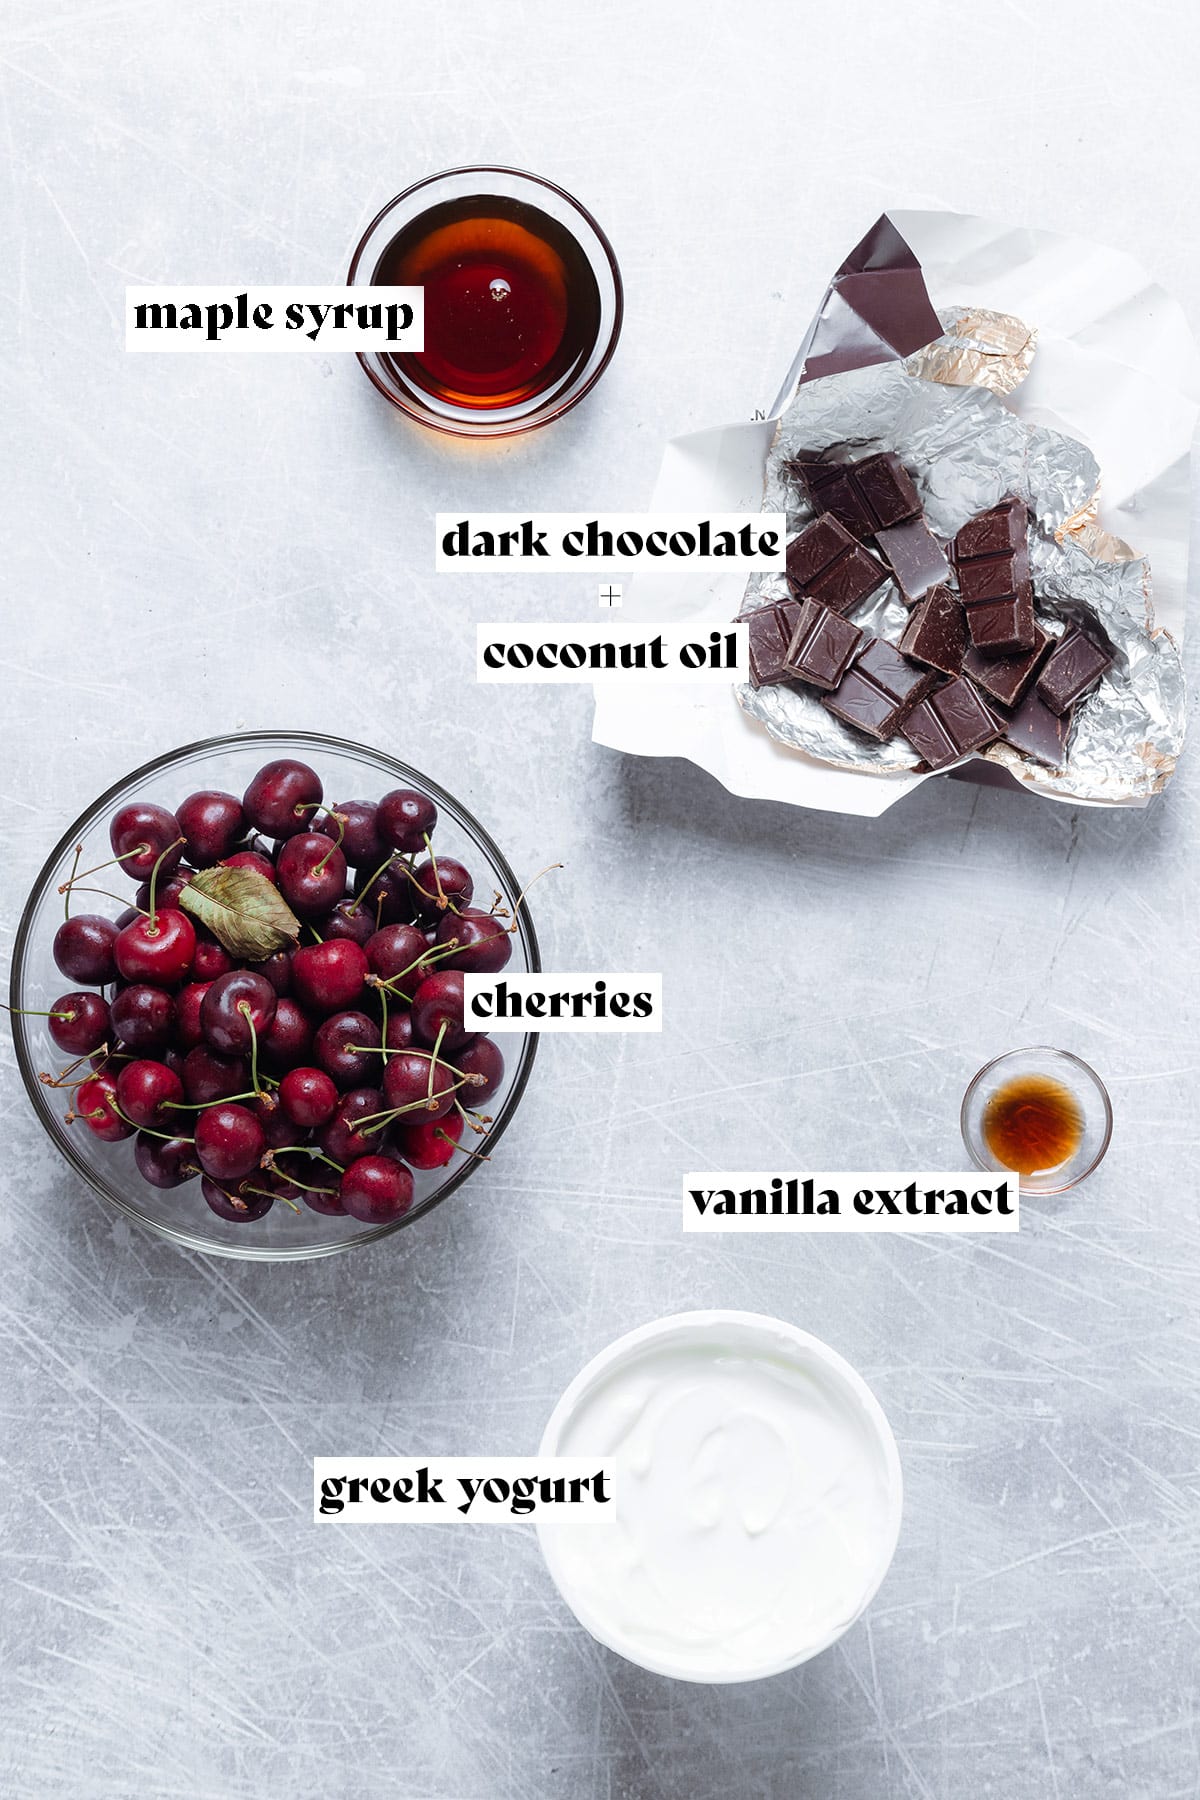 Ingredients for popsicles like cherries, yogurt, and chocolate laid out on a light grey background.